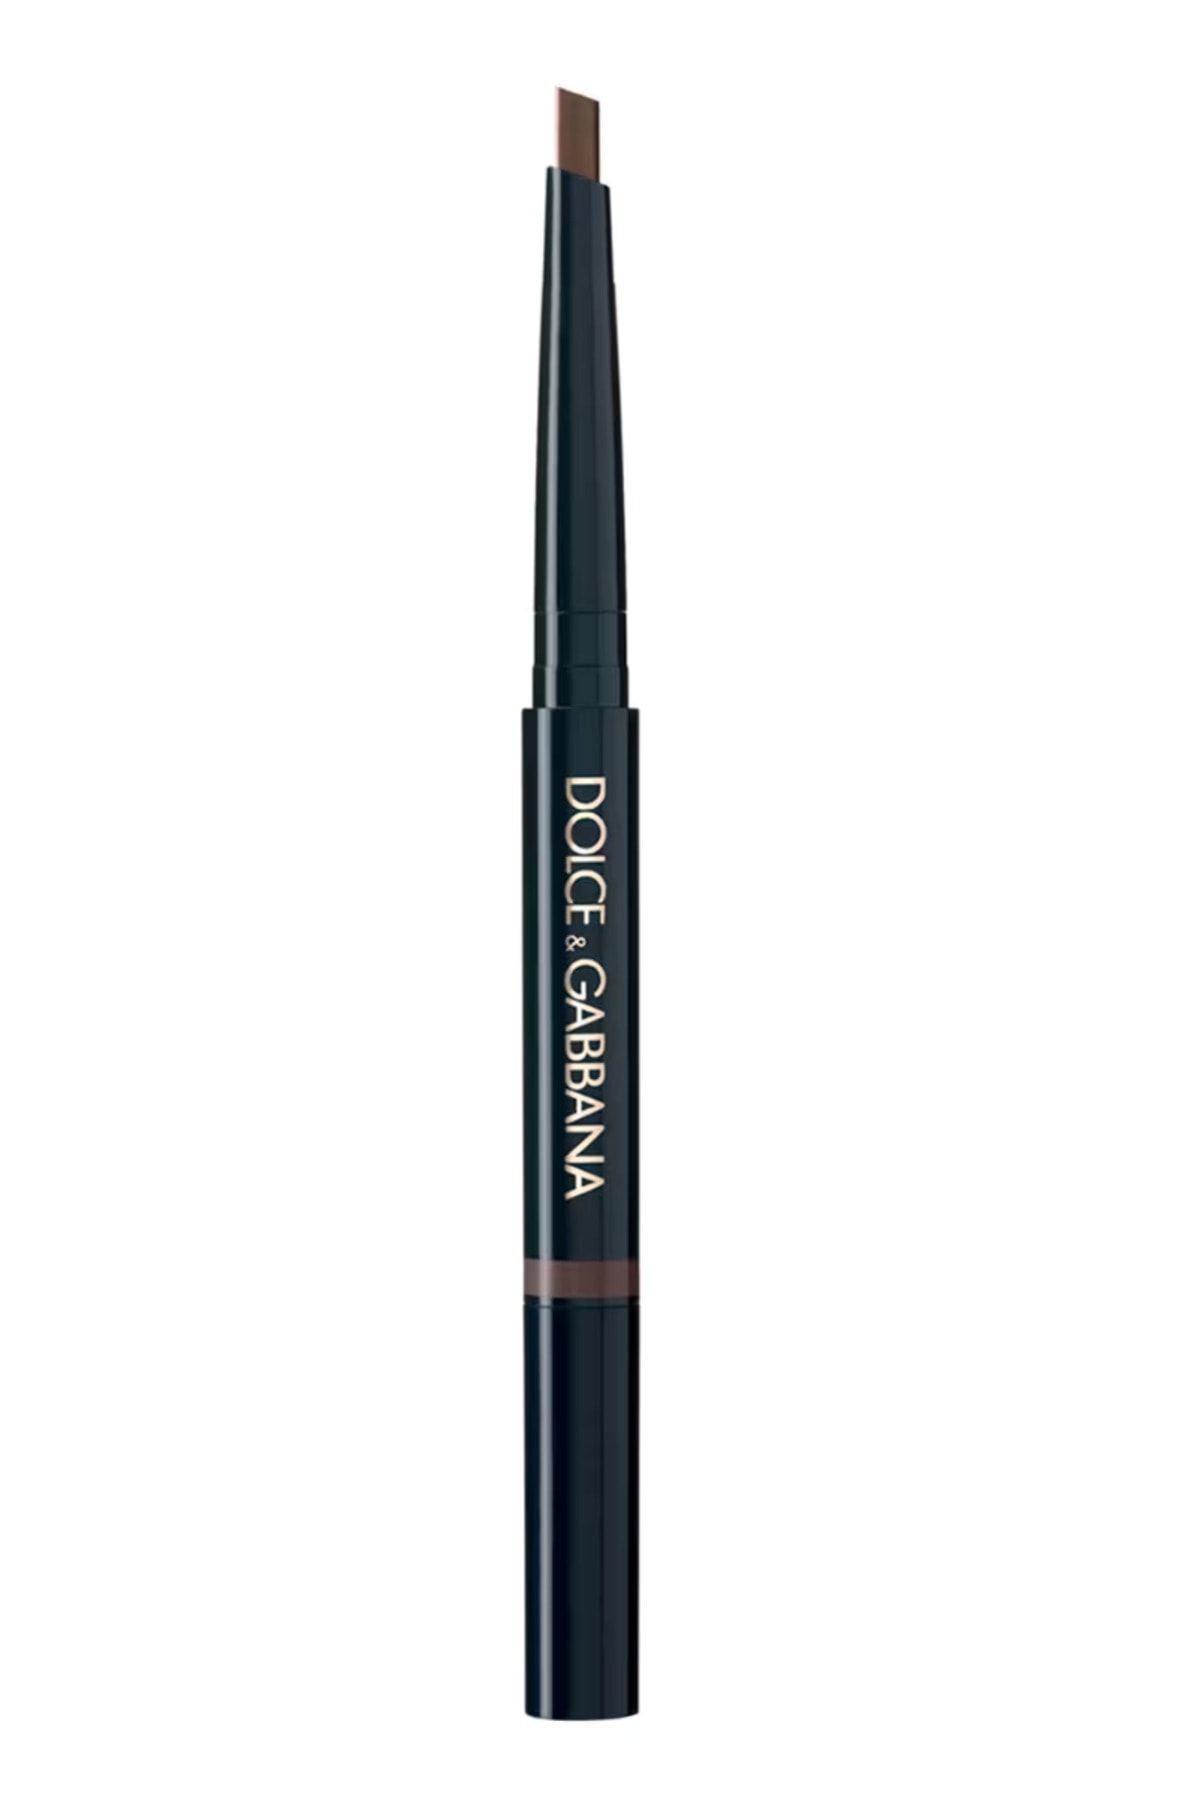 Dolce&Gabbana The Brow Liner